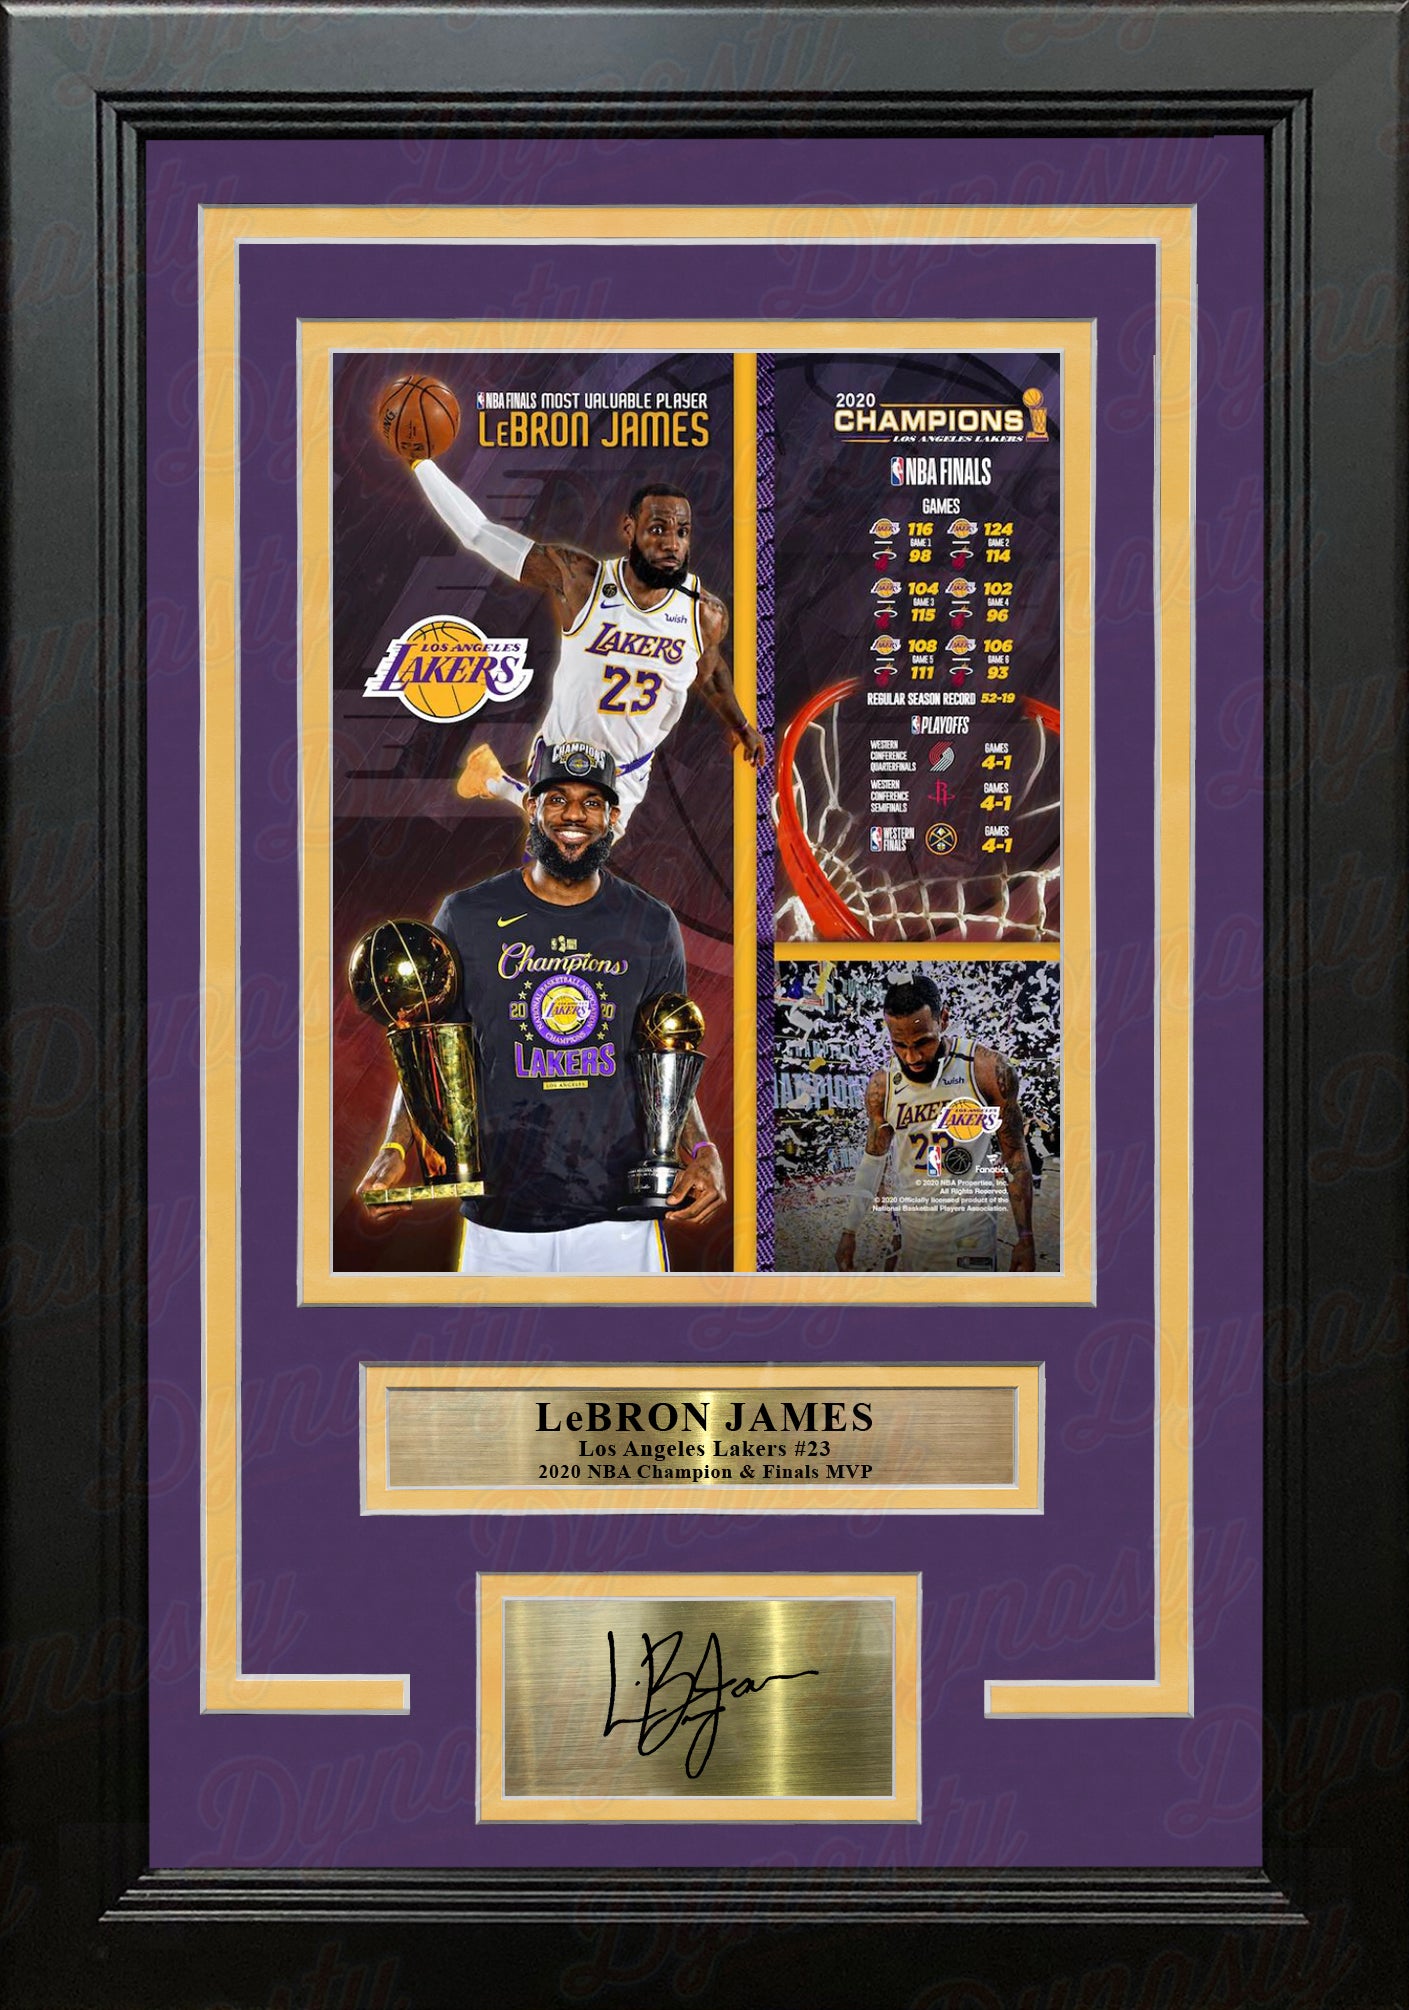 12x8 A4 LeBron James La Lakers Los Angeles Autographed Signed Photo Photograph Picture Frame Basketball Poster Gift